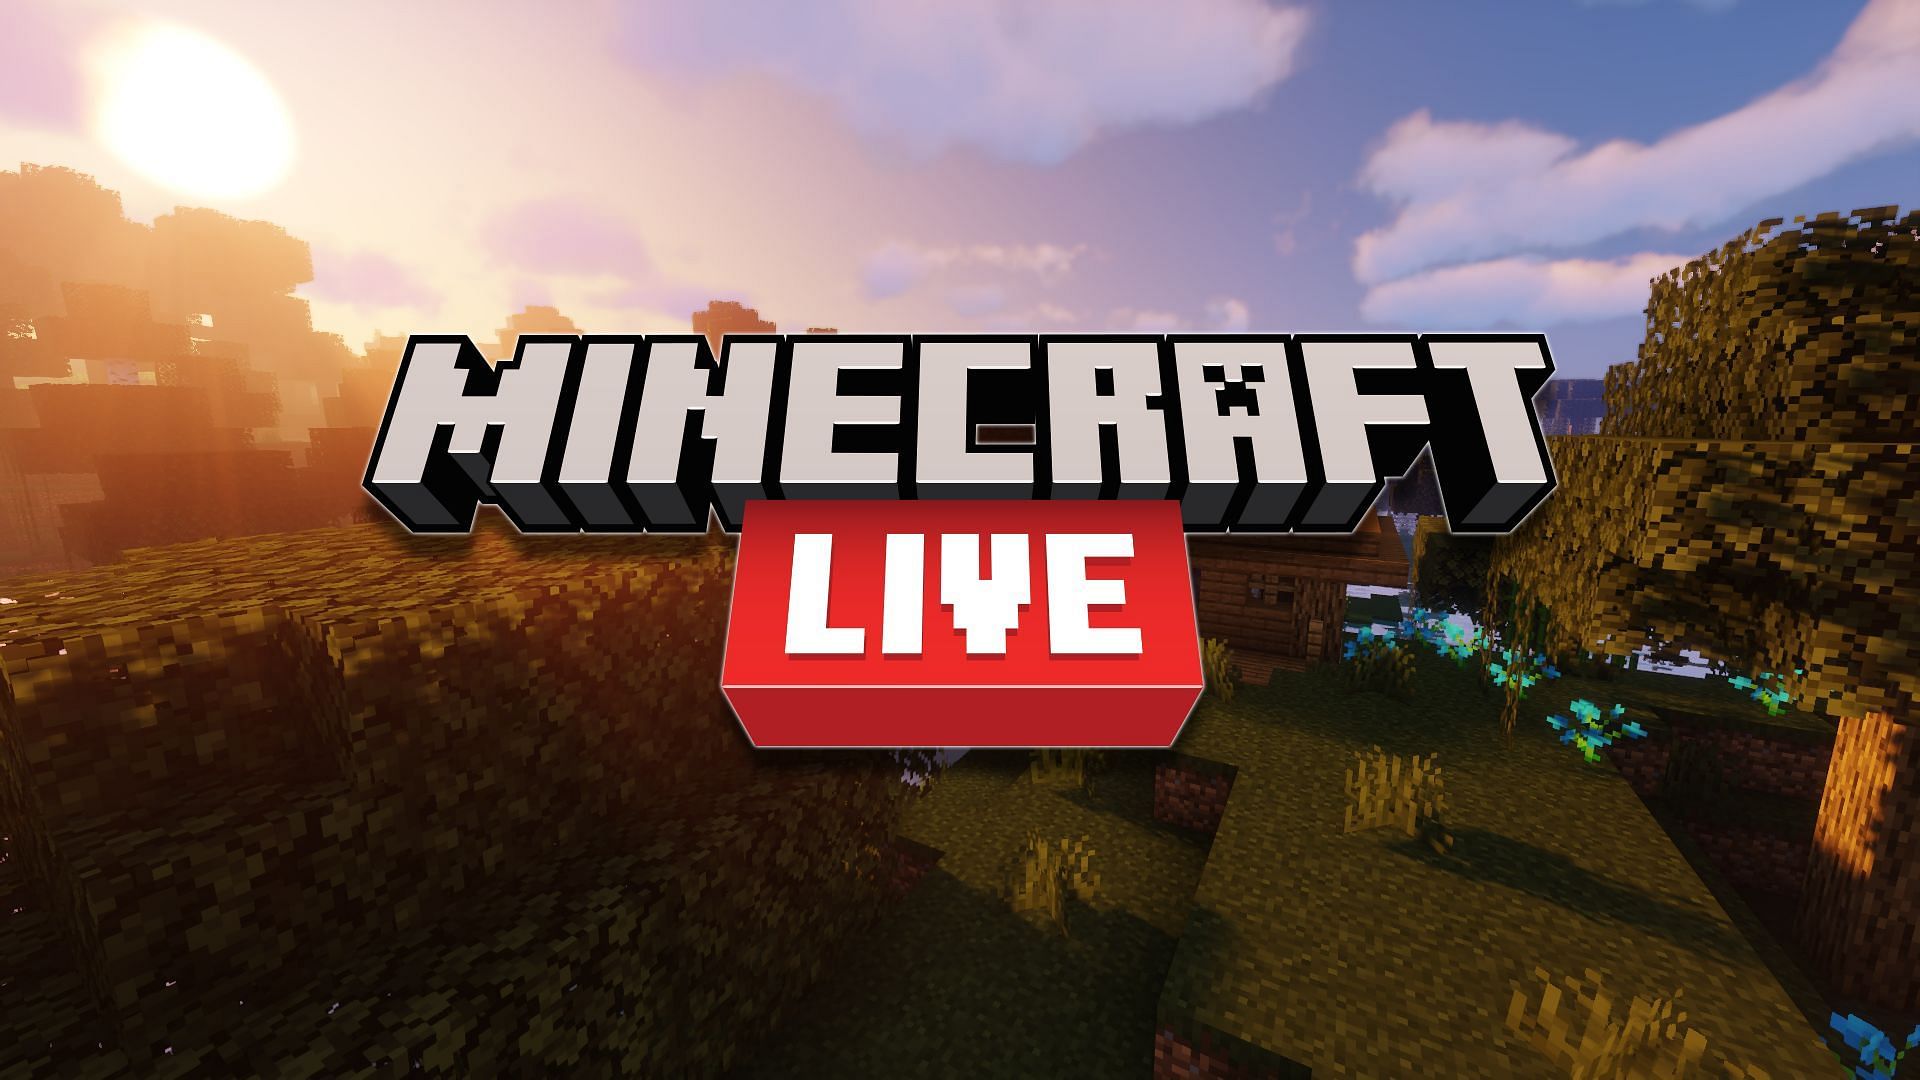 Minecraft Live 2022 Date, details, and everything you need to know